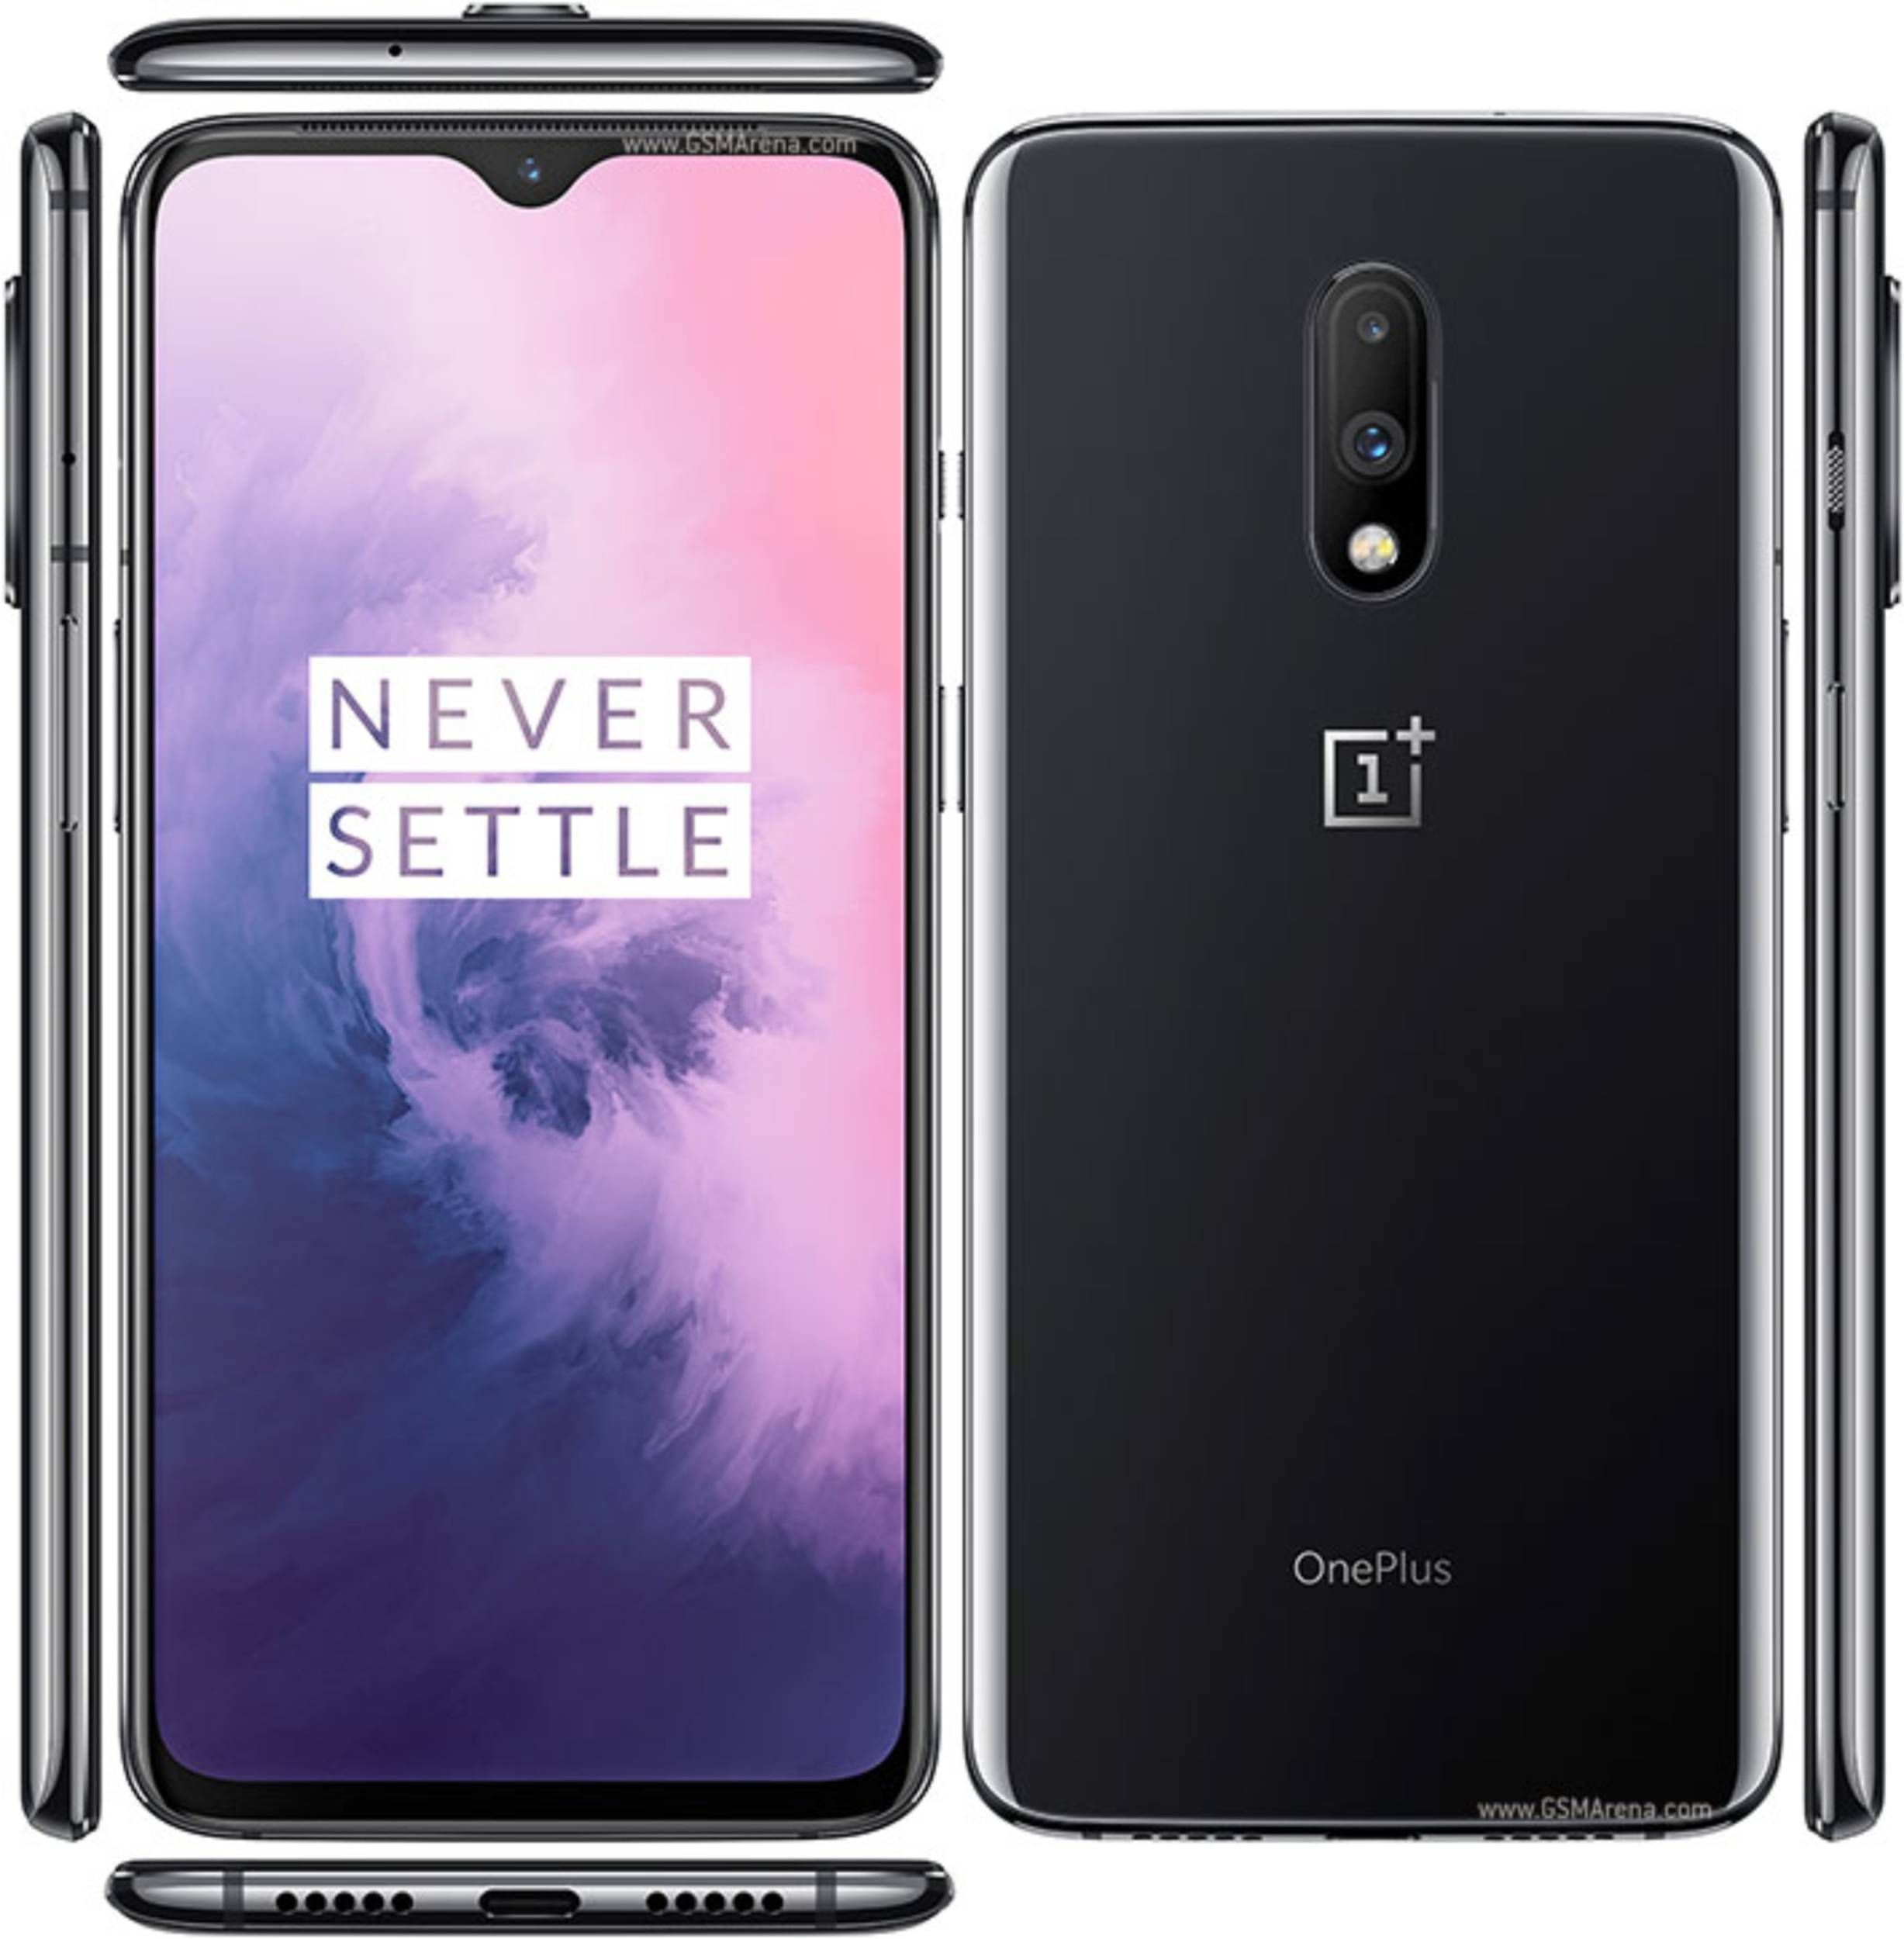 OnePlus 7 Specifications and Price in Kenya